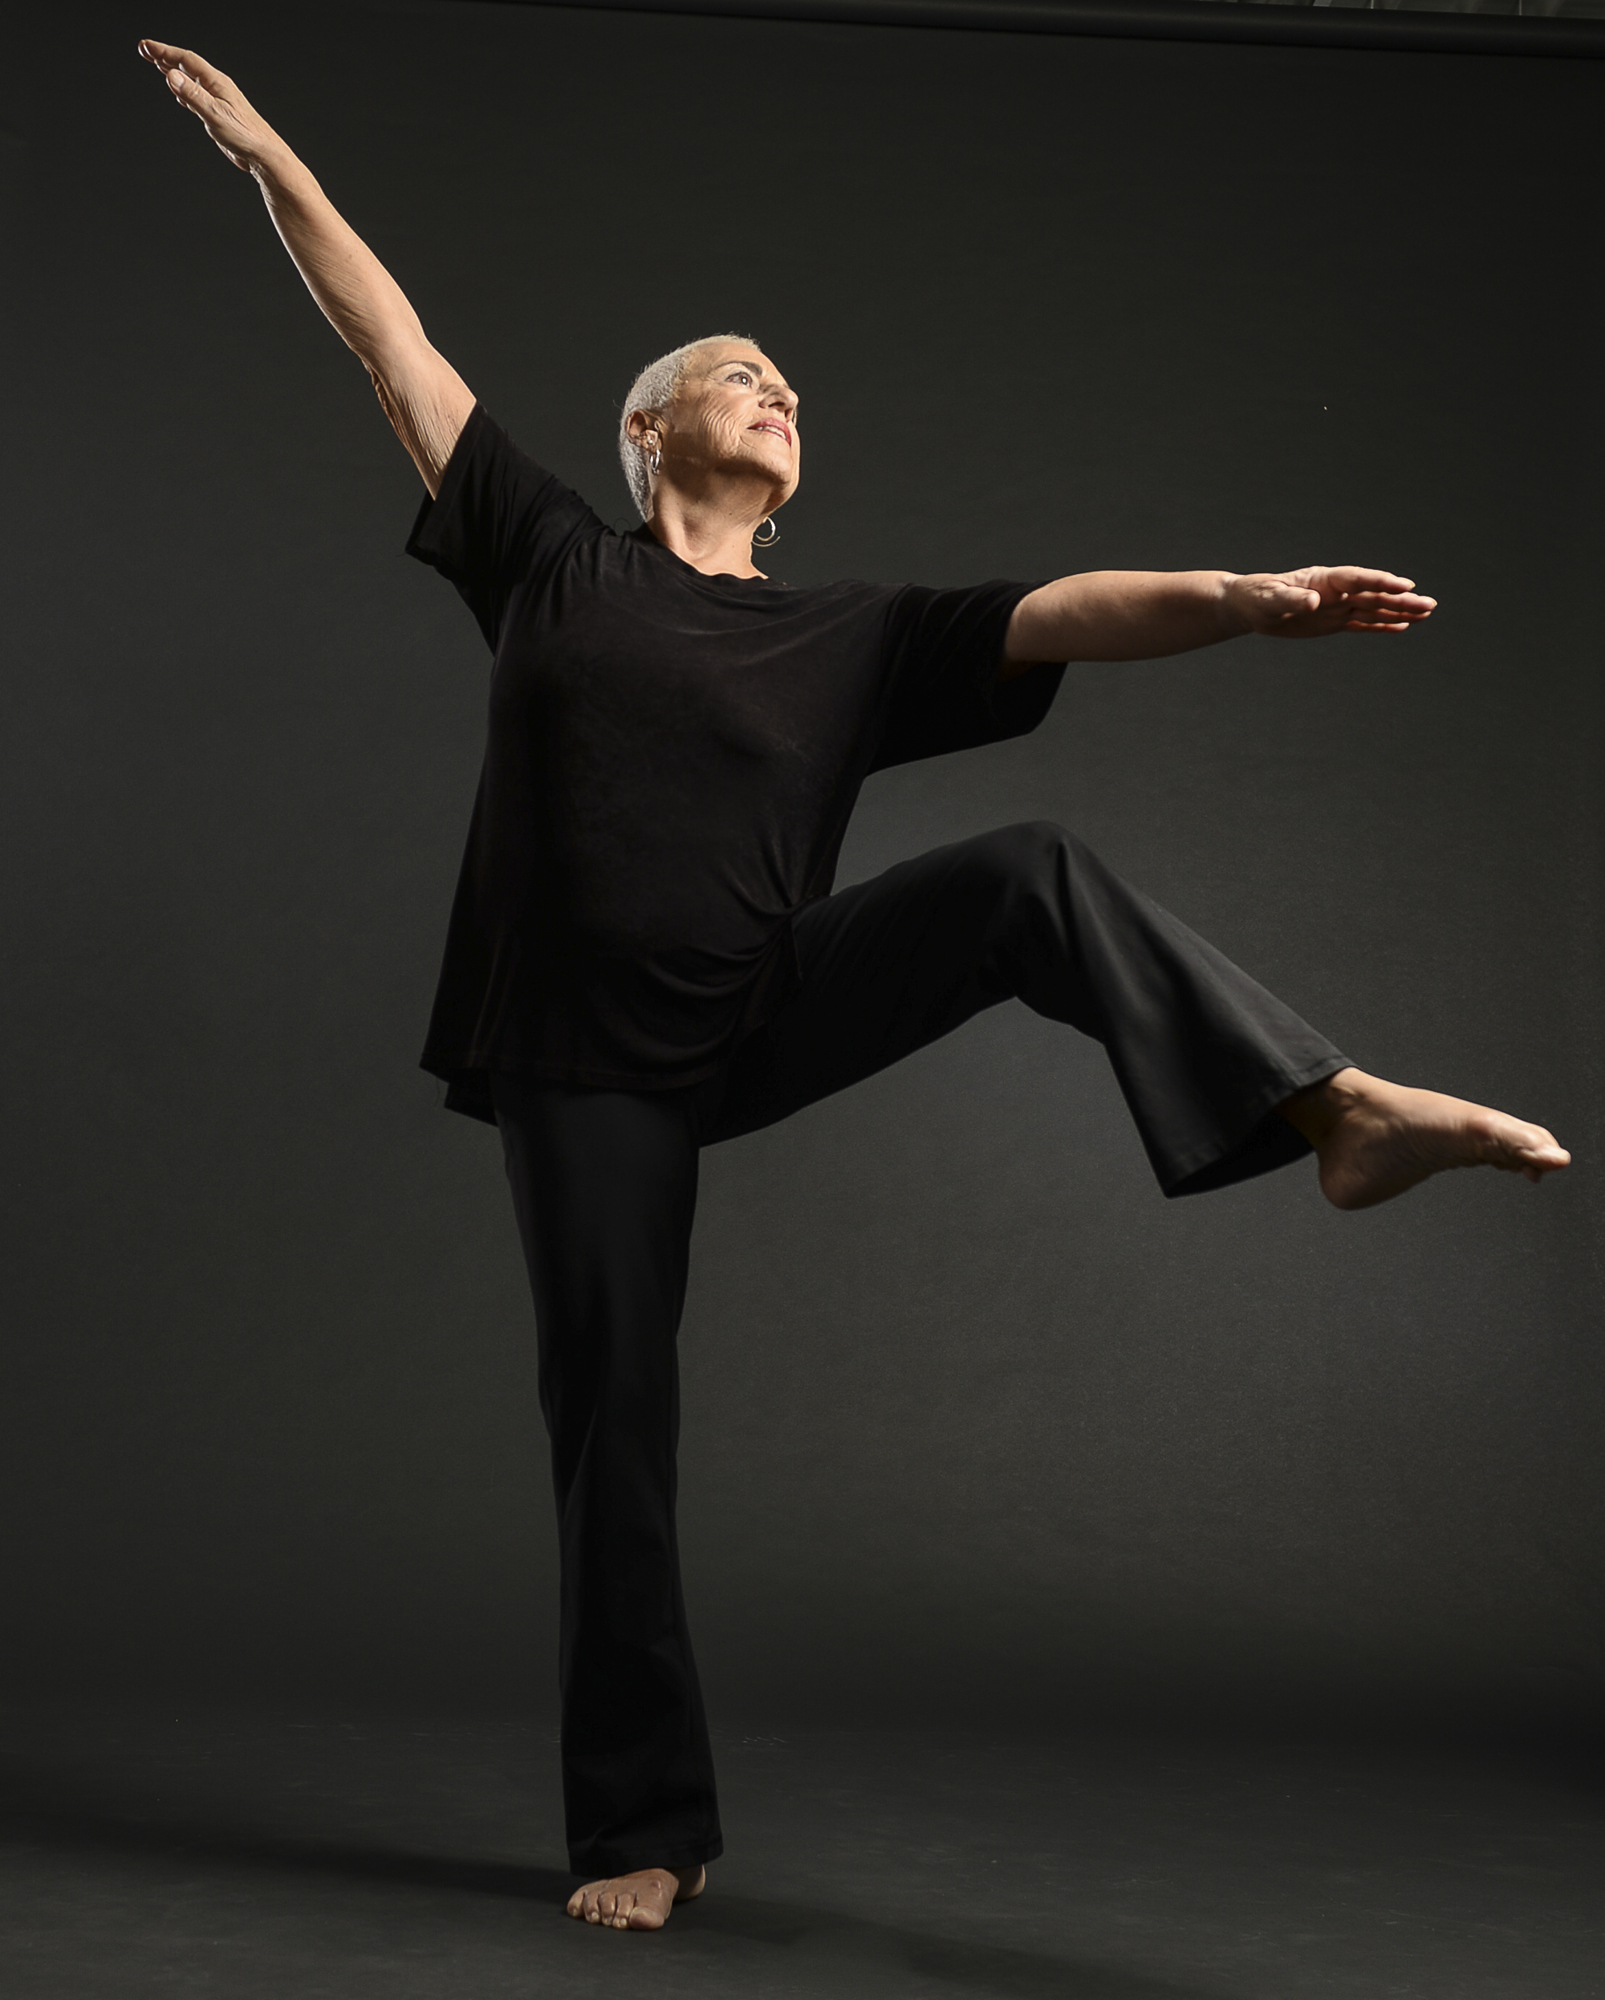 Elizabeth Bergmann was the first dancer/choreographer to perform in Sarasota Contemporary Dance's In Studio Performance Series. Photo by Barbara Banks